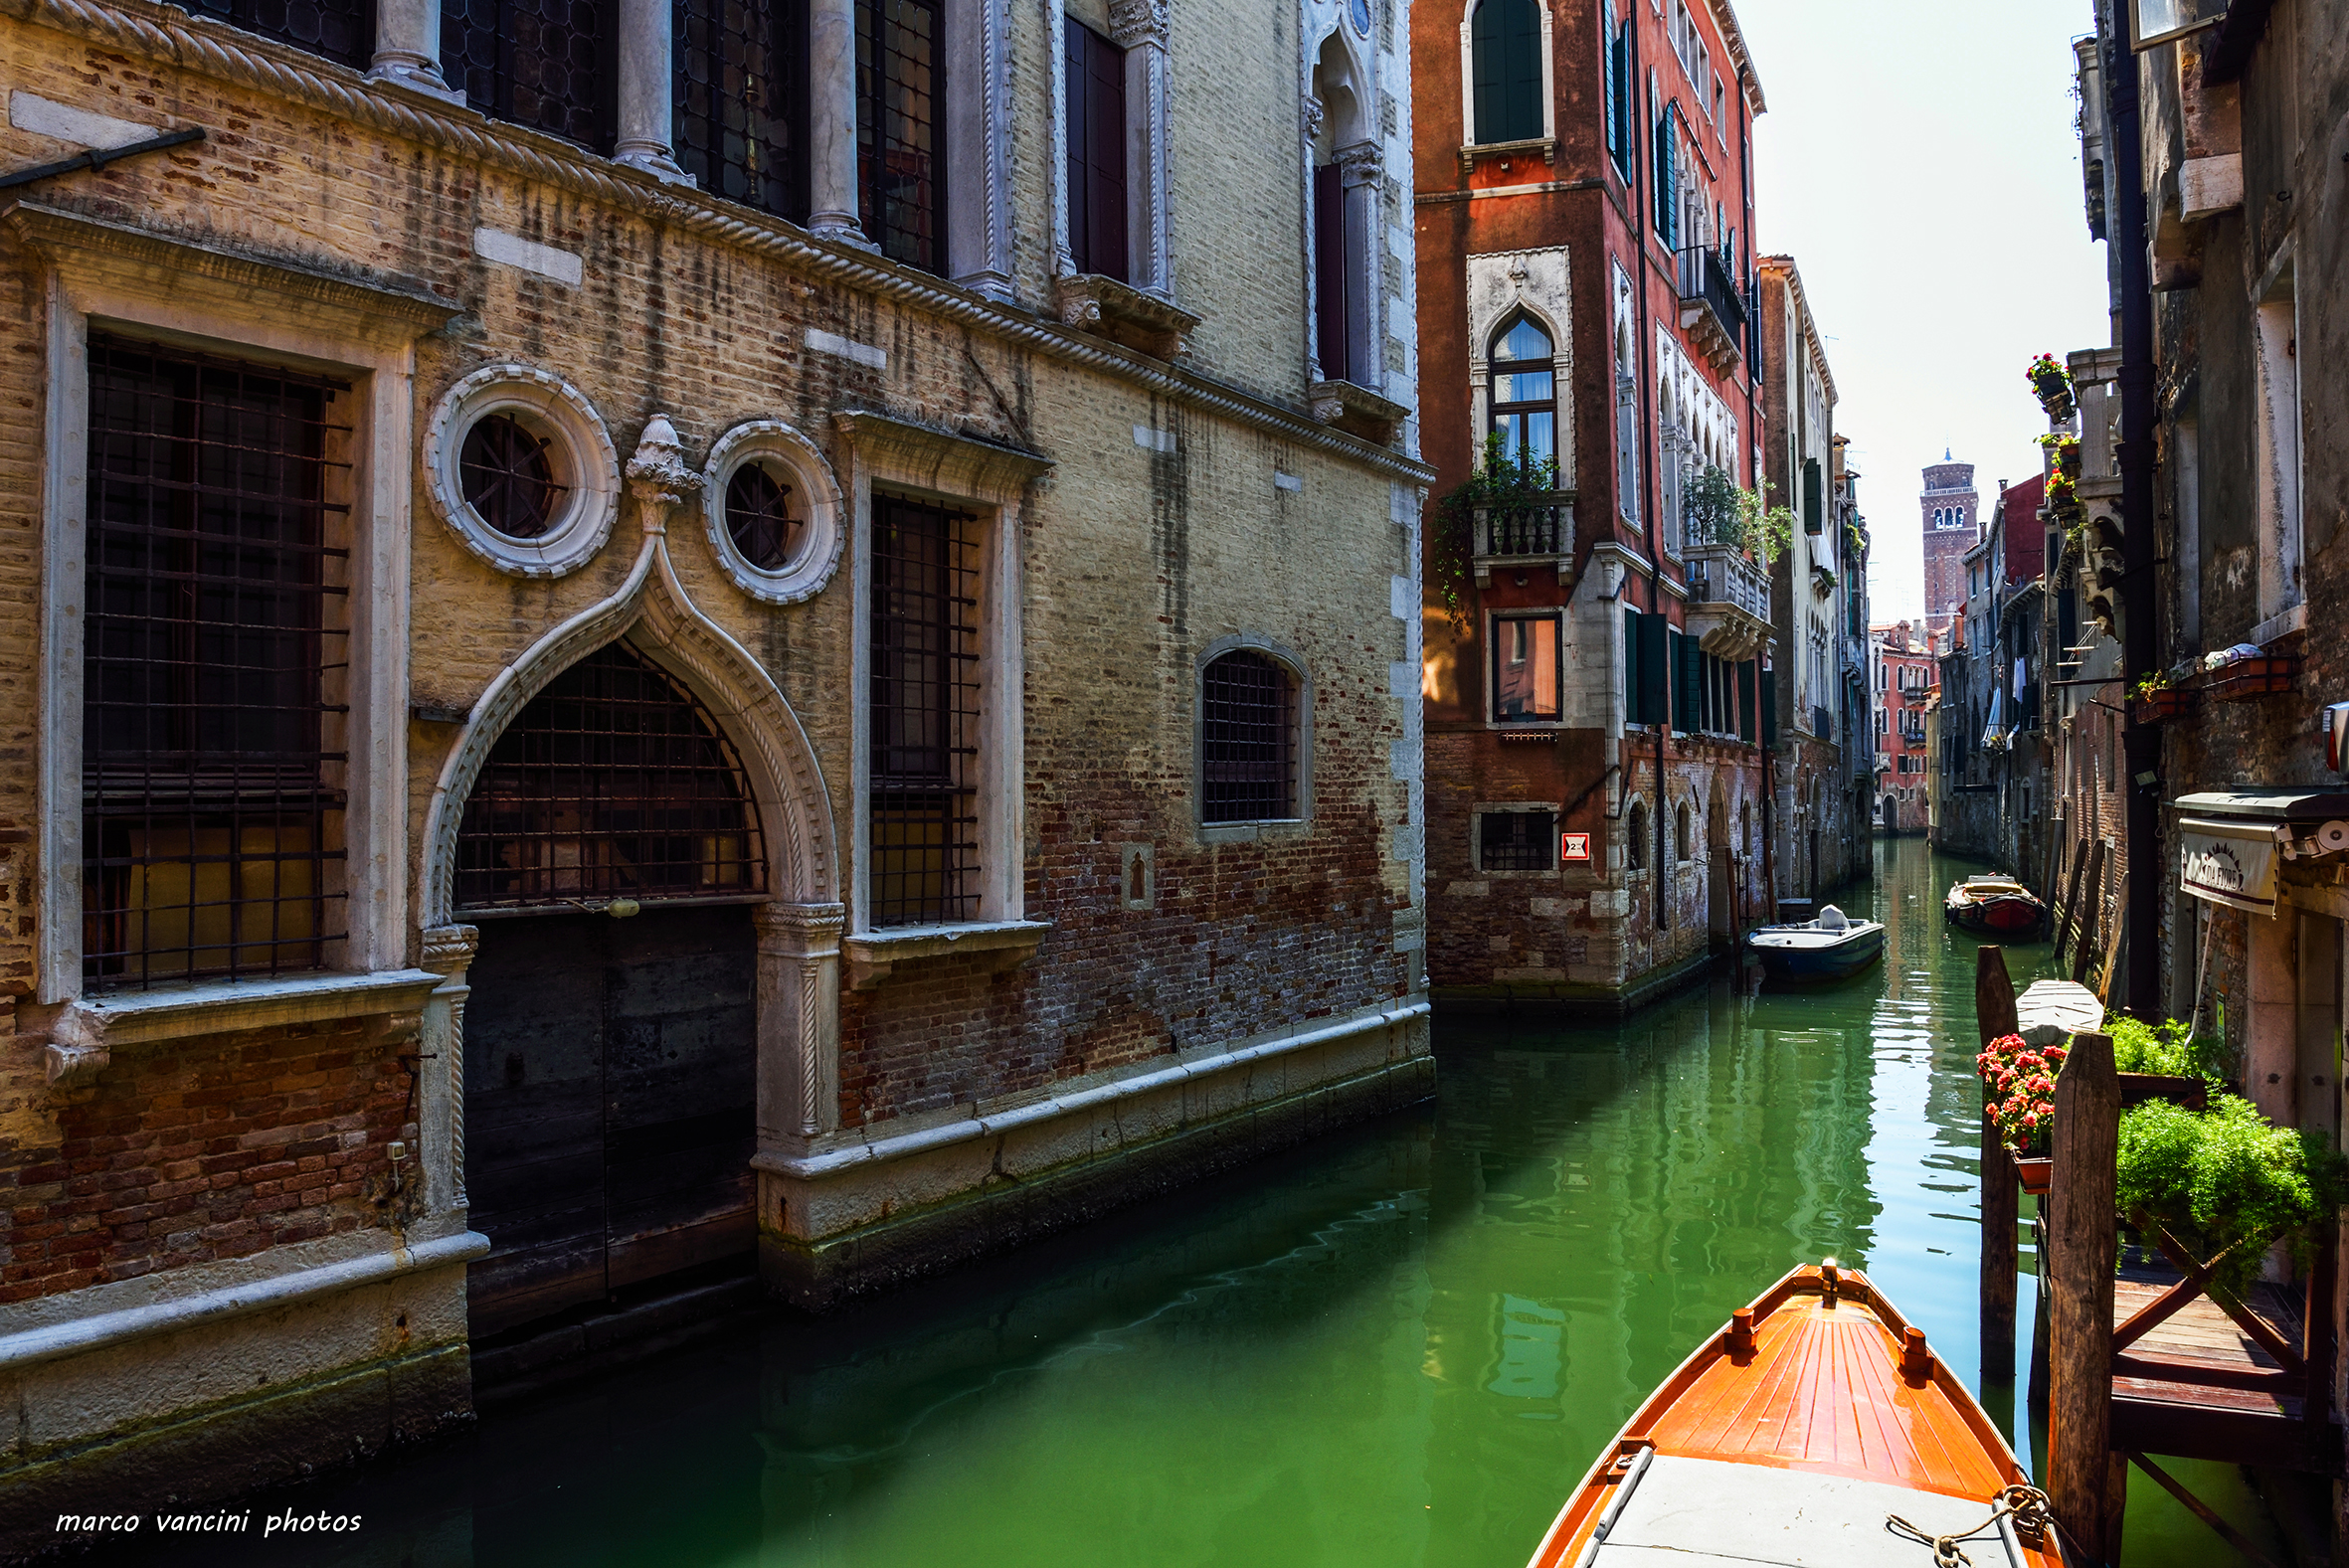 The canals of Venice...